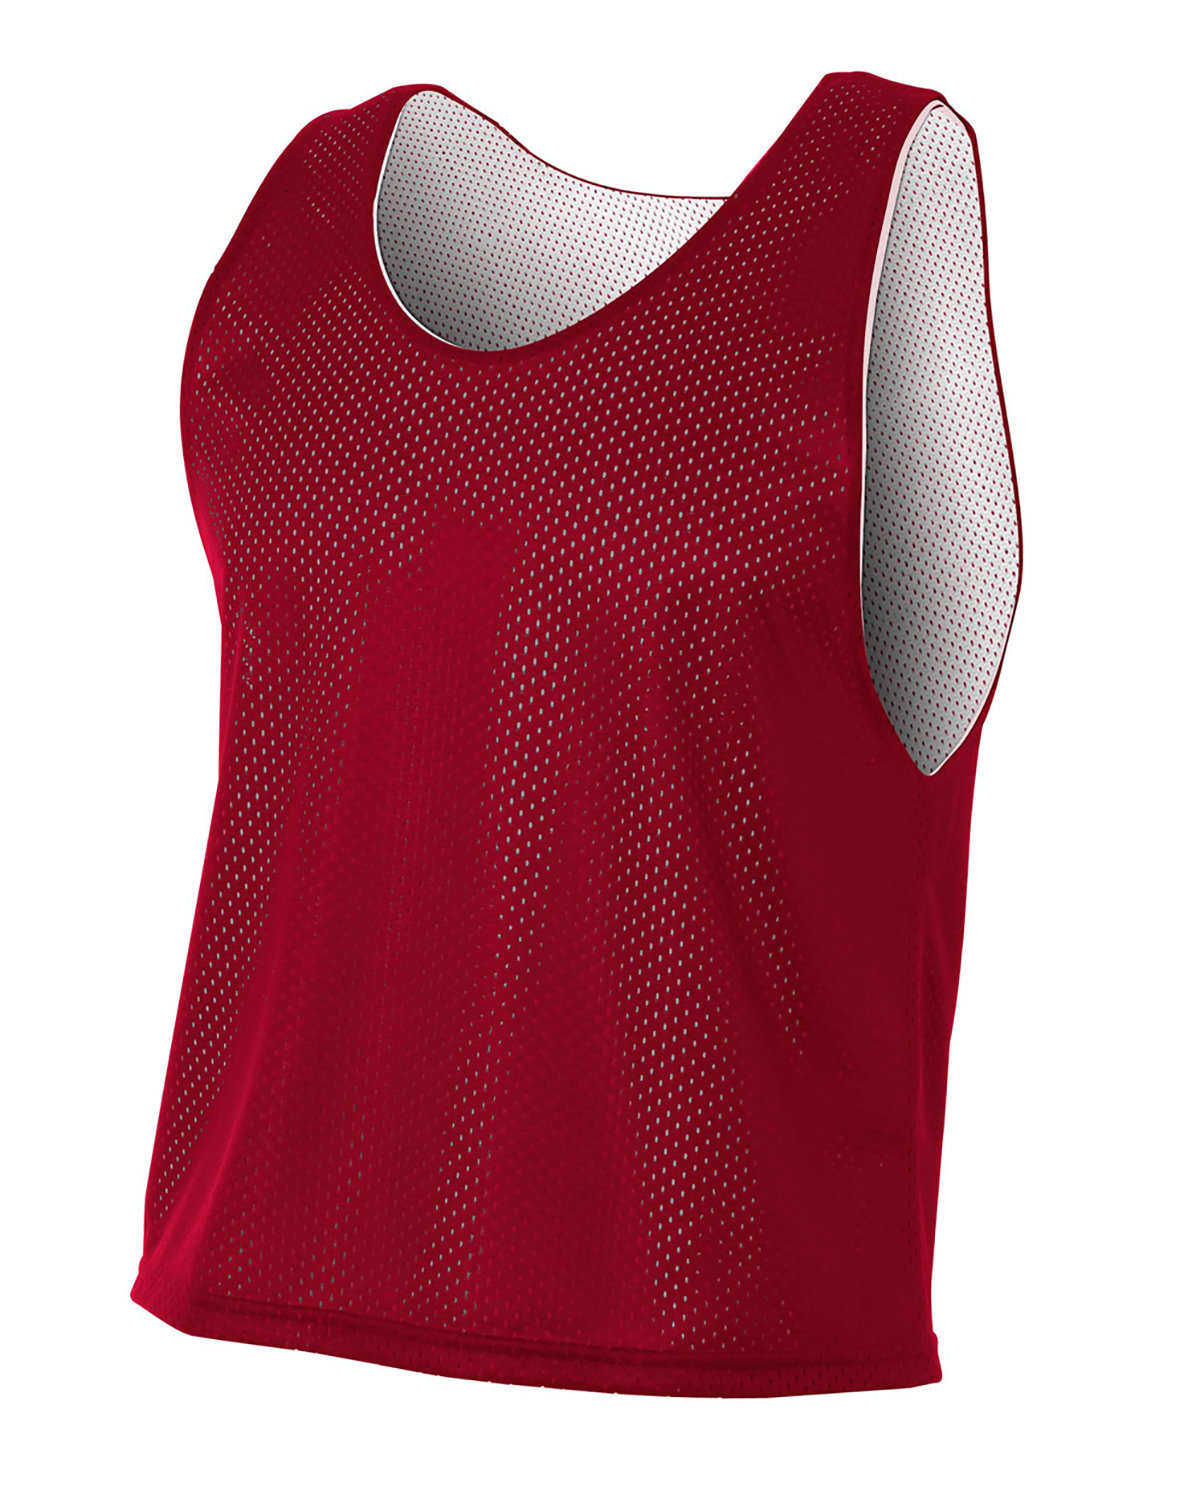 Front view of Men’s Cropped Lacrosse Reversible Practice Jersey